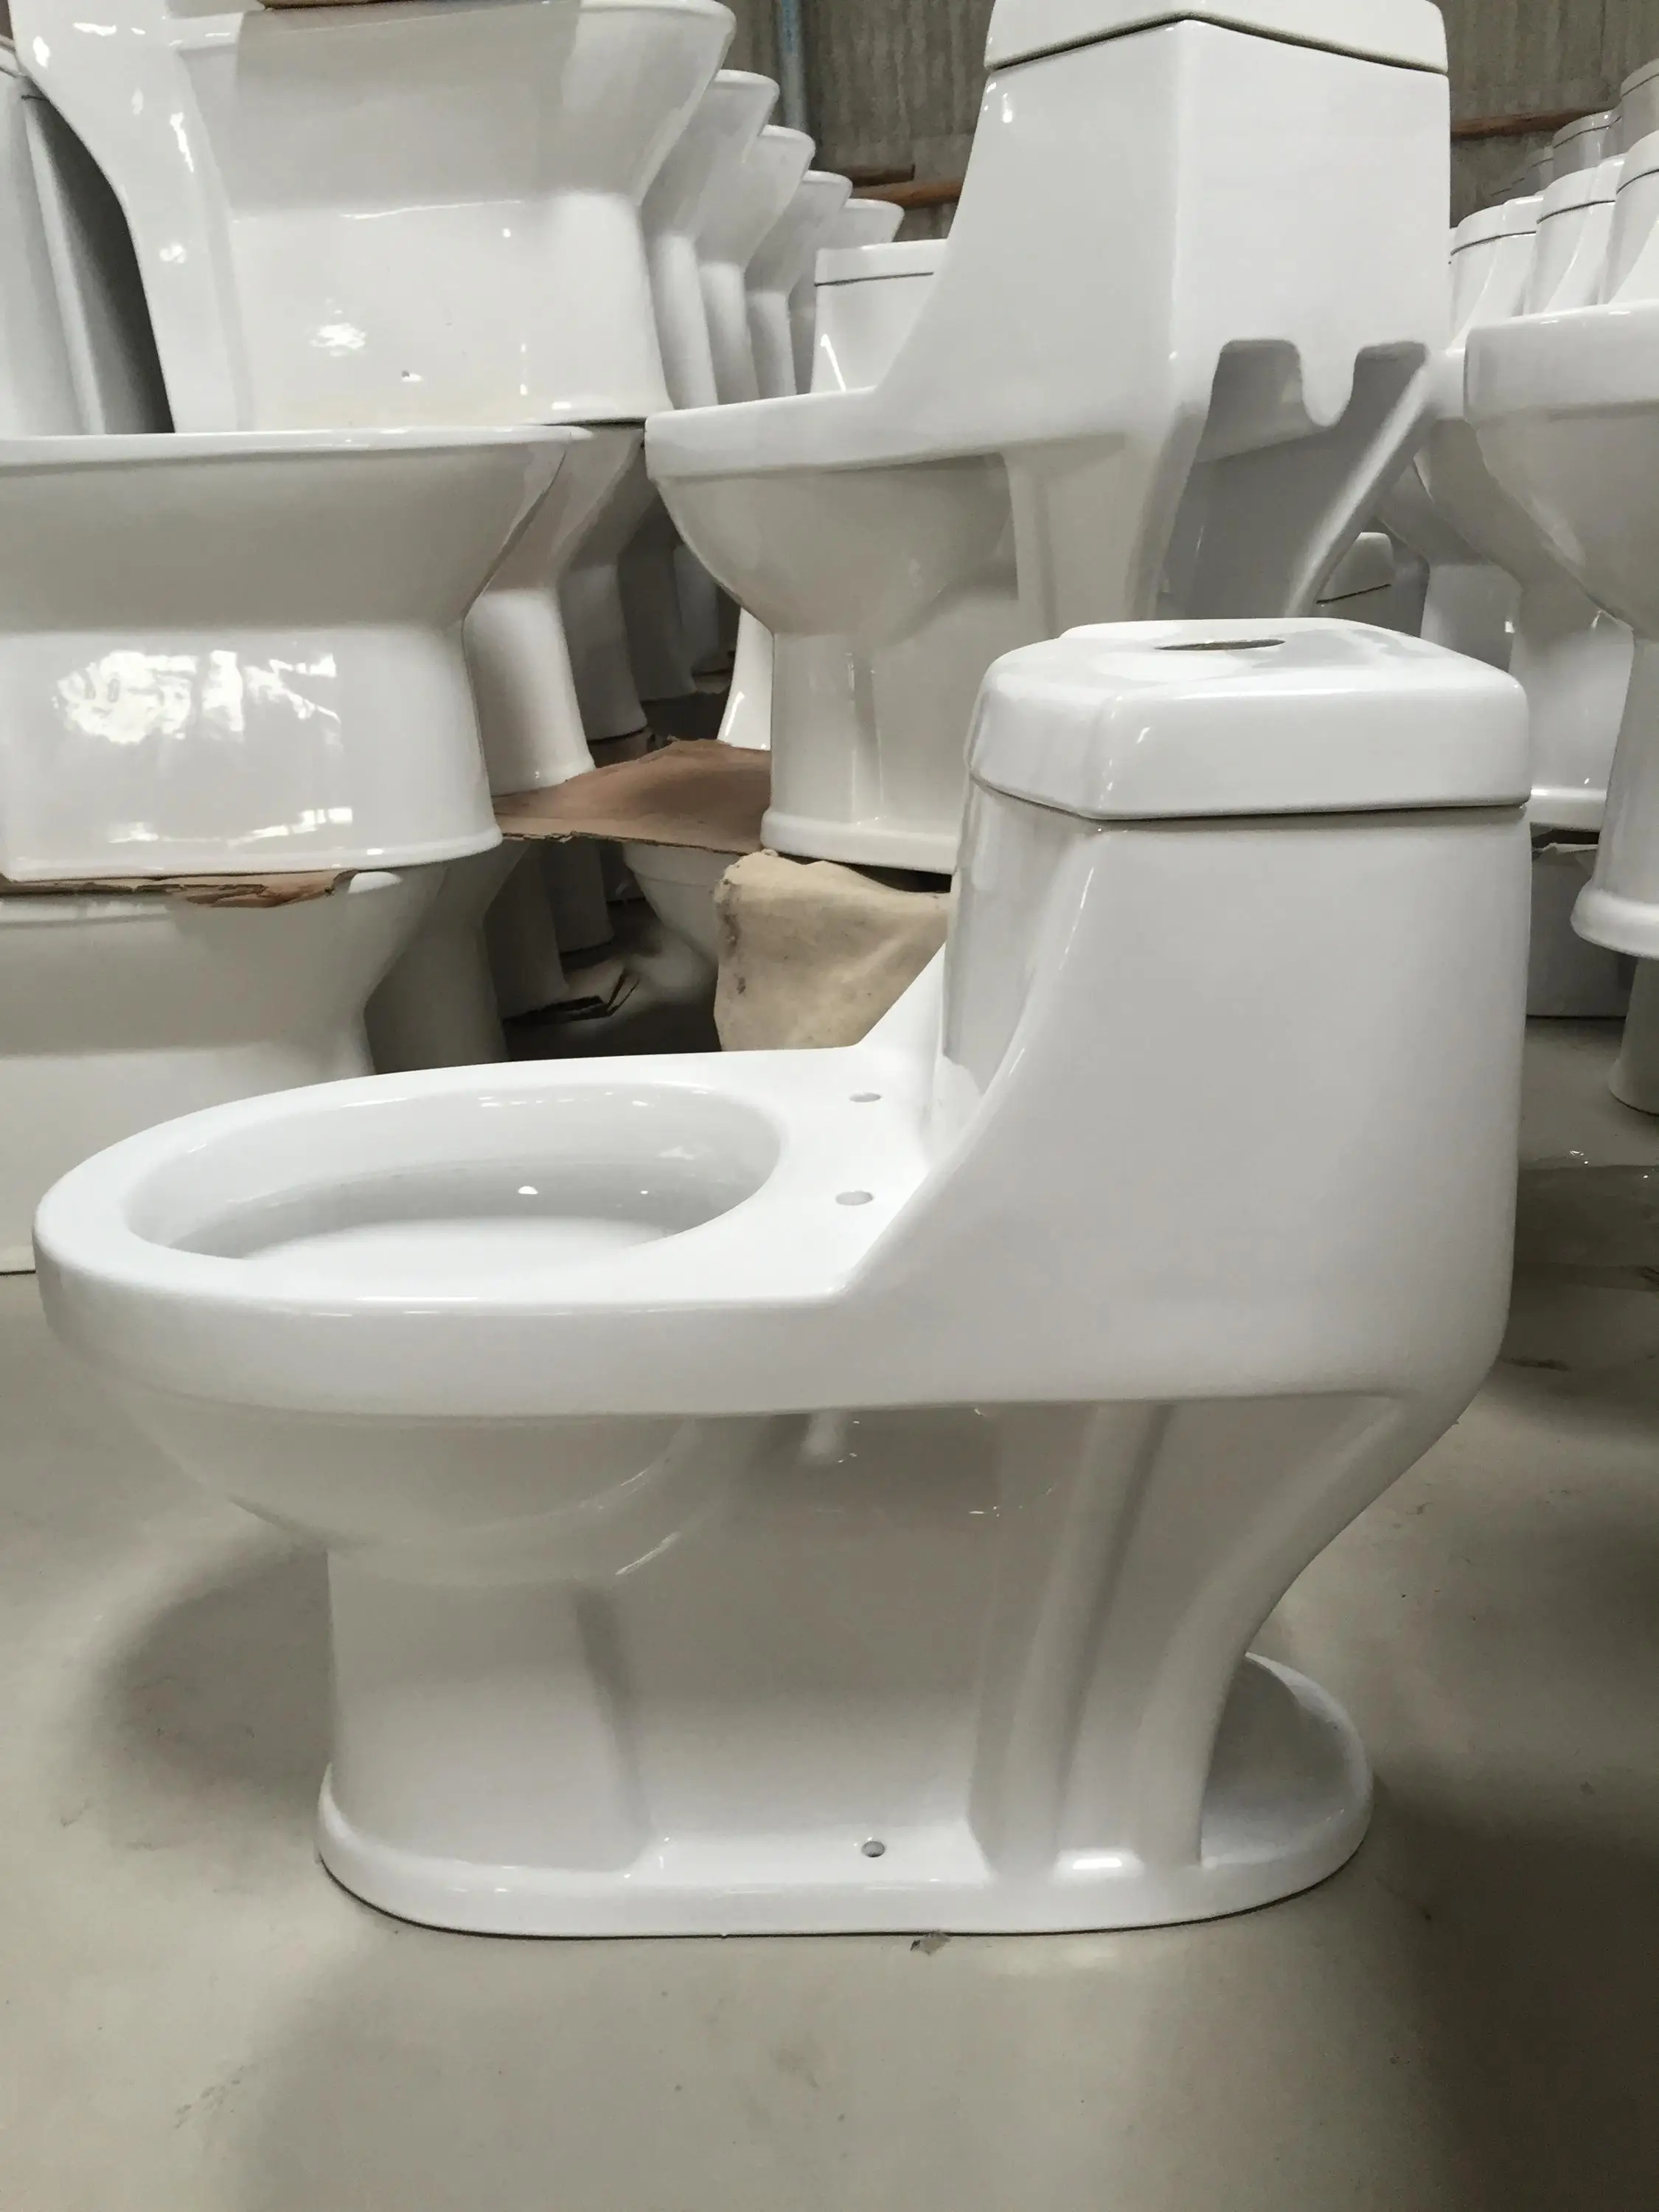 Bathroom Toilet Commode Price In Pakistan Strap 100mm Dimensions - Buy